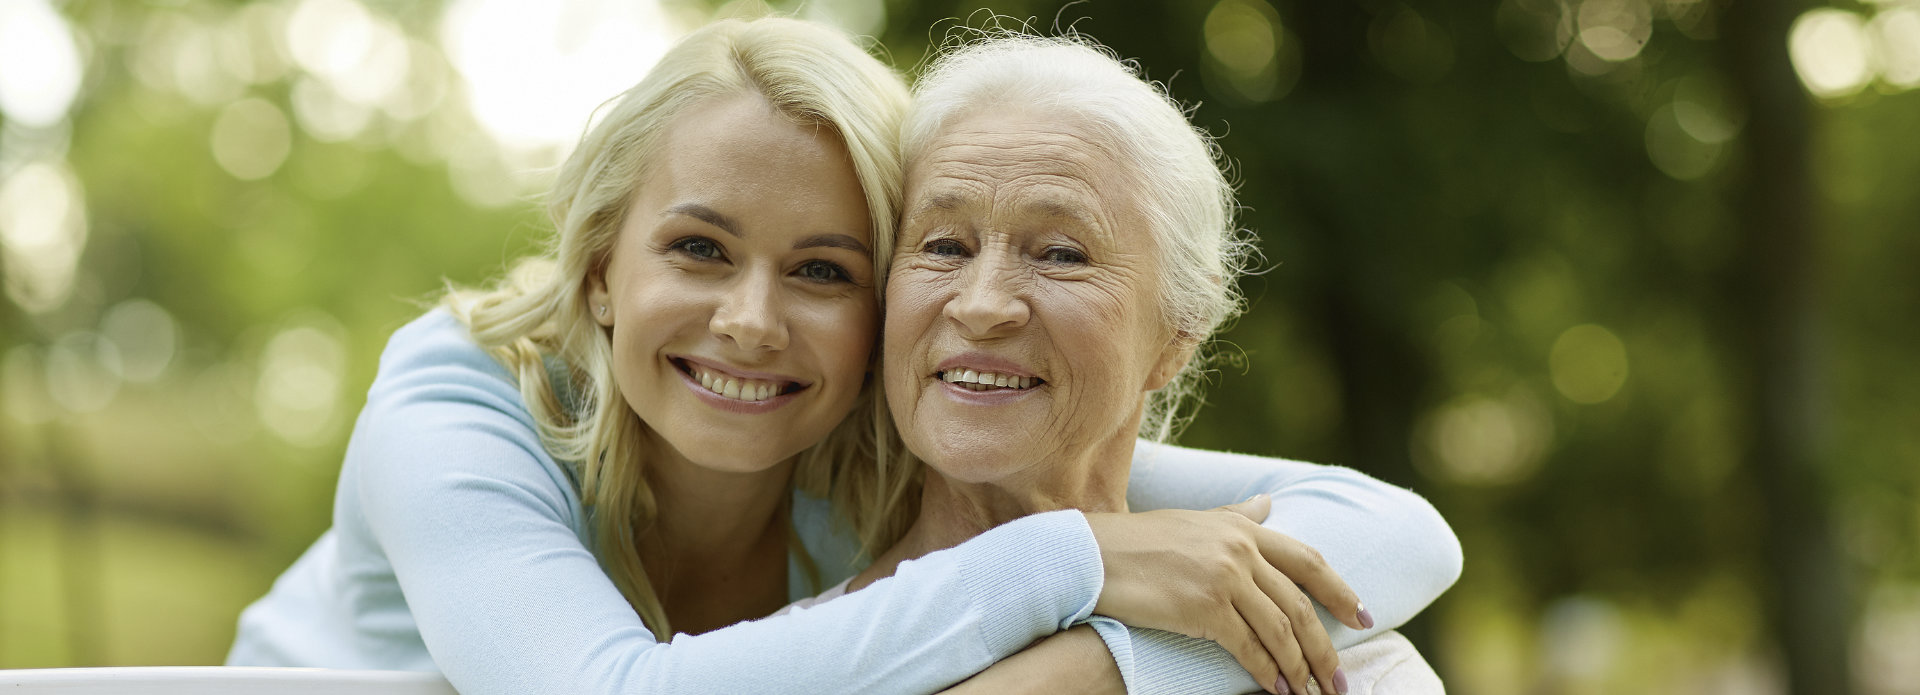 Broadly smiling young woman hugging her grandmother